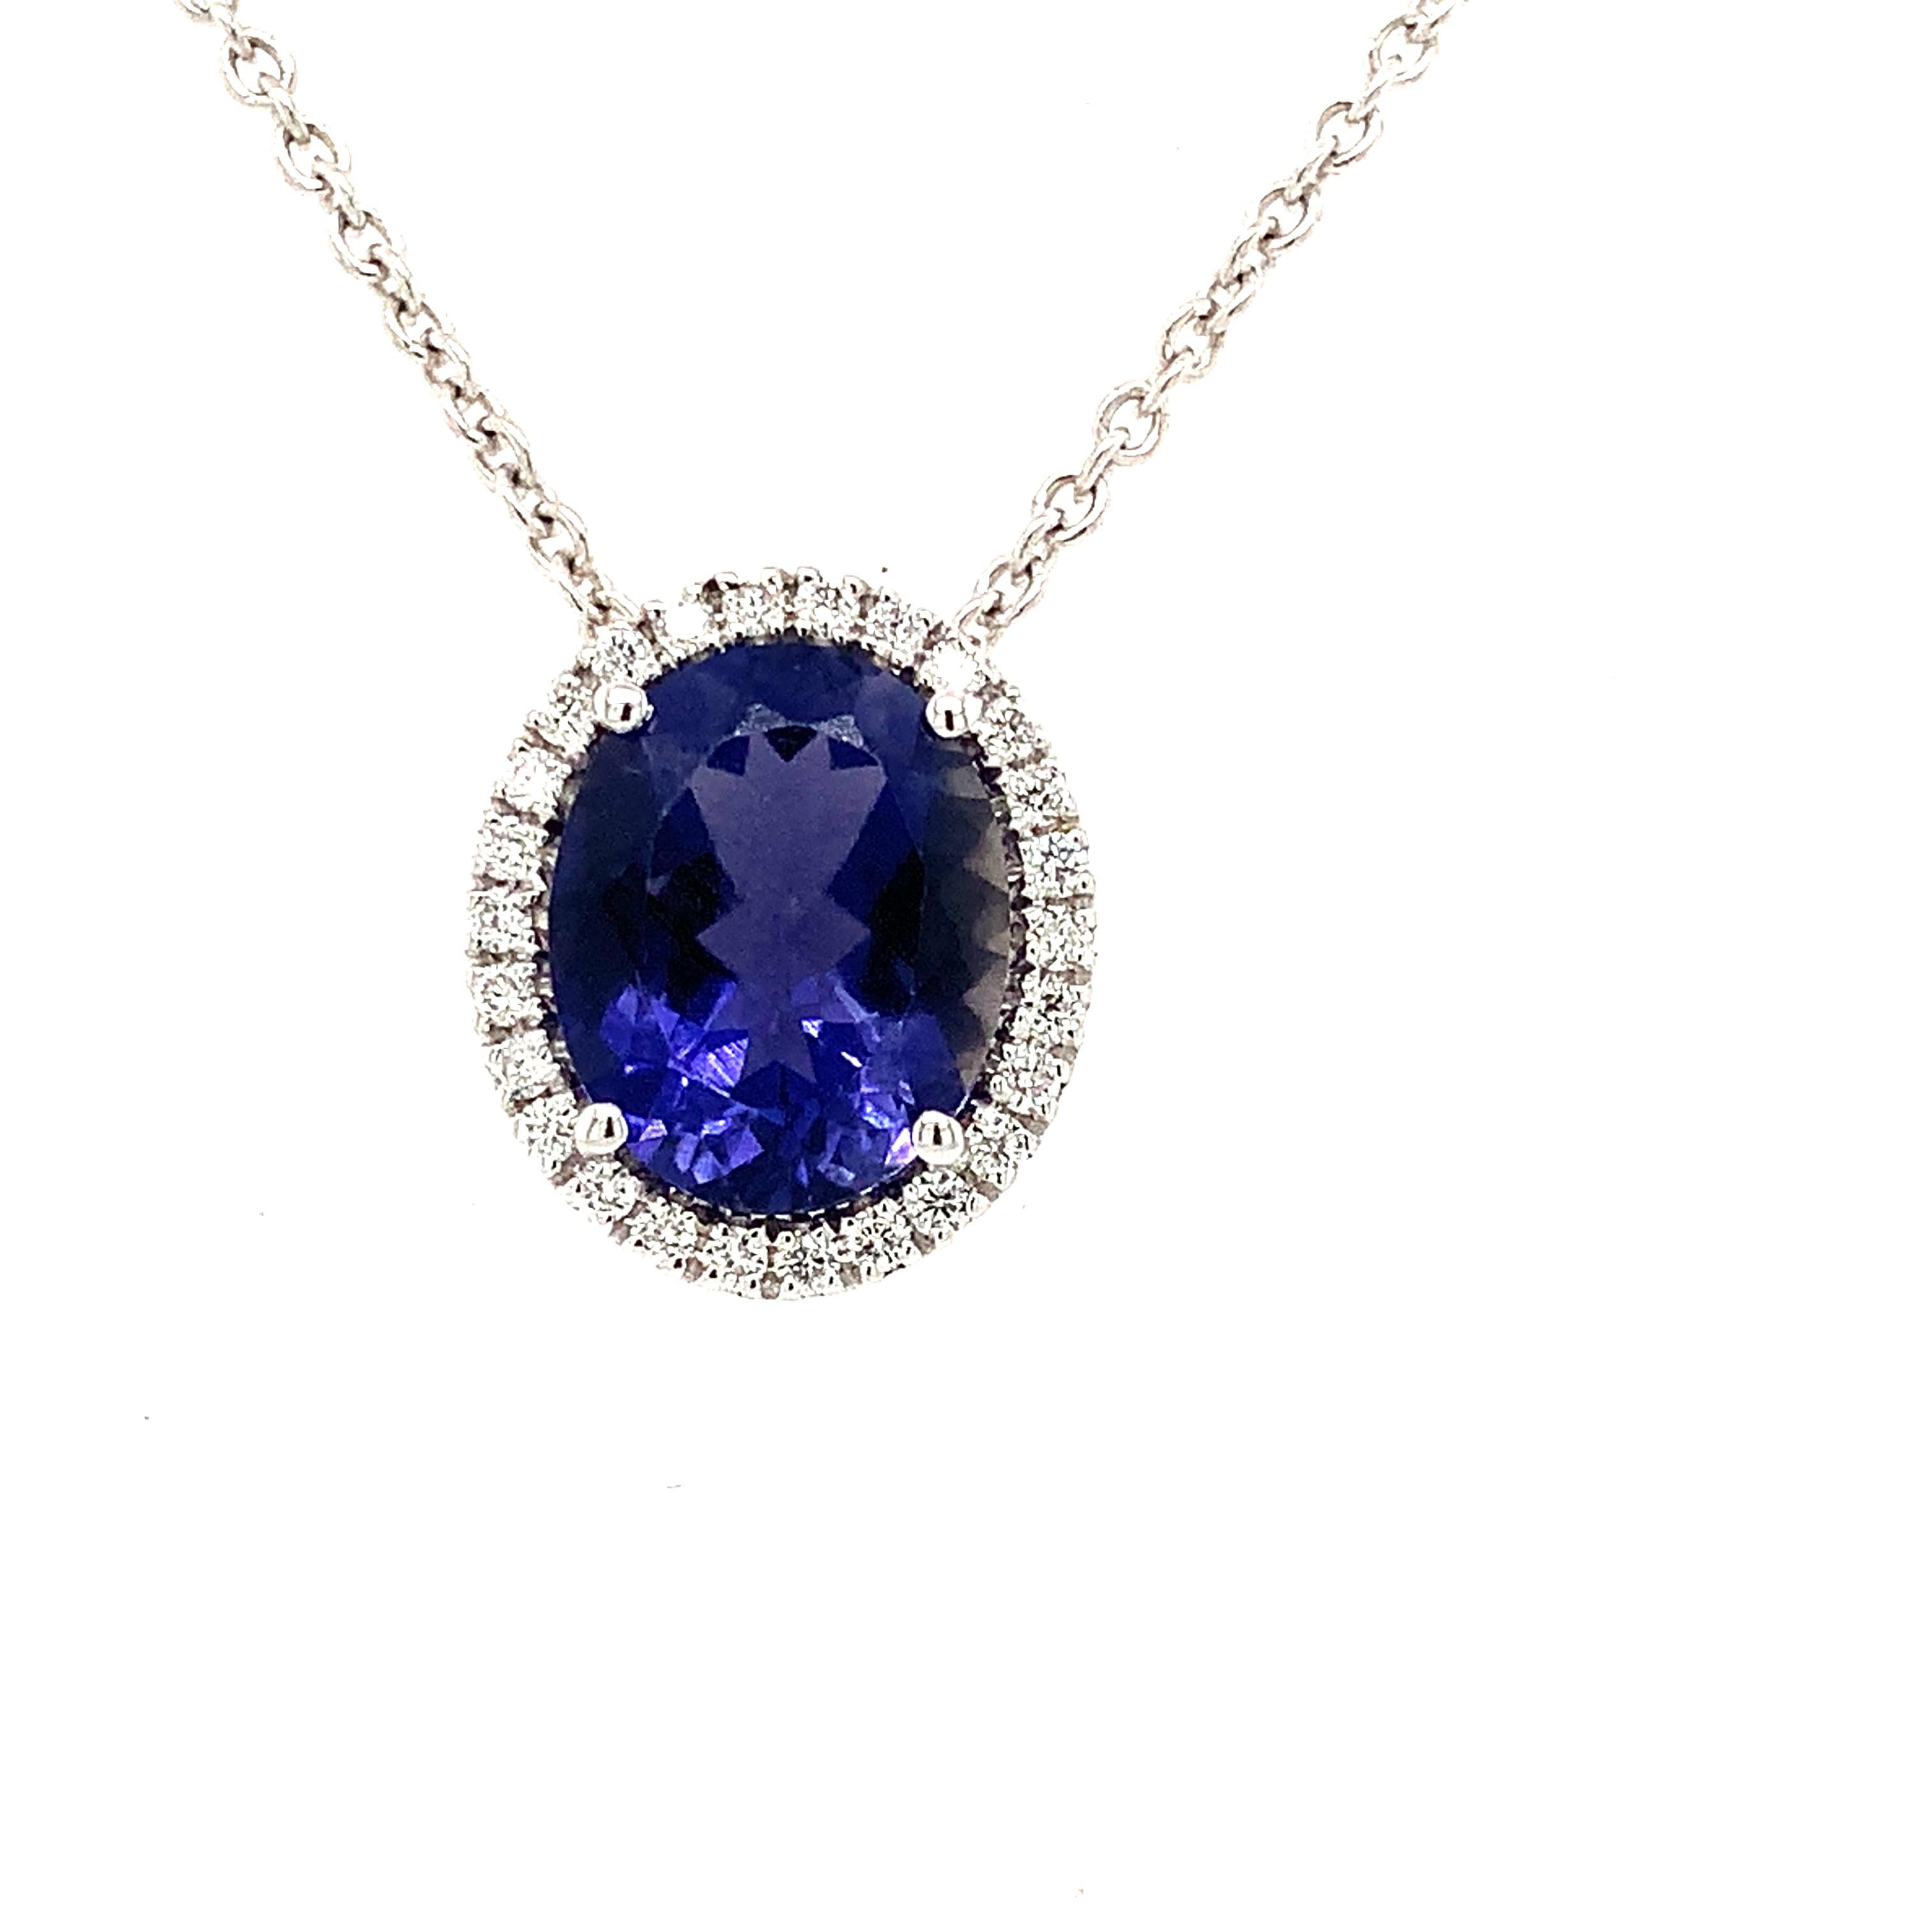 18 Kt White Gold Oval Shape Necklace in Iolite and White Diamond by Garavelli :
Discover timeless elegance with the 18 Kt White Gold Oval Shape Pendant in Iolite and White Diamond by Garavelli, a masterpiece of jewelry artistry.
Crafted from